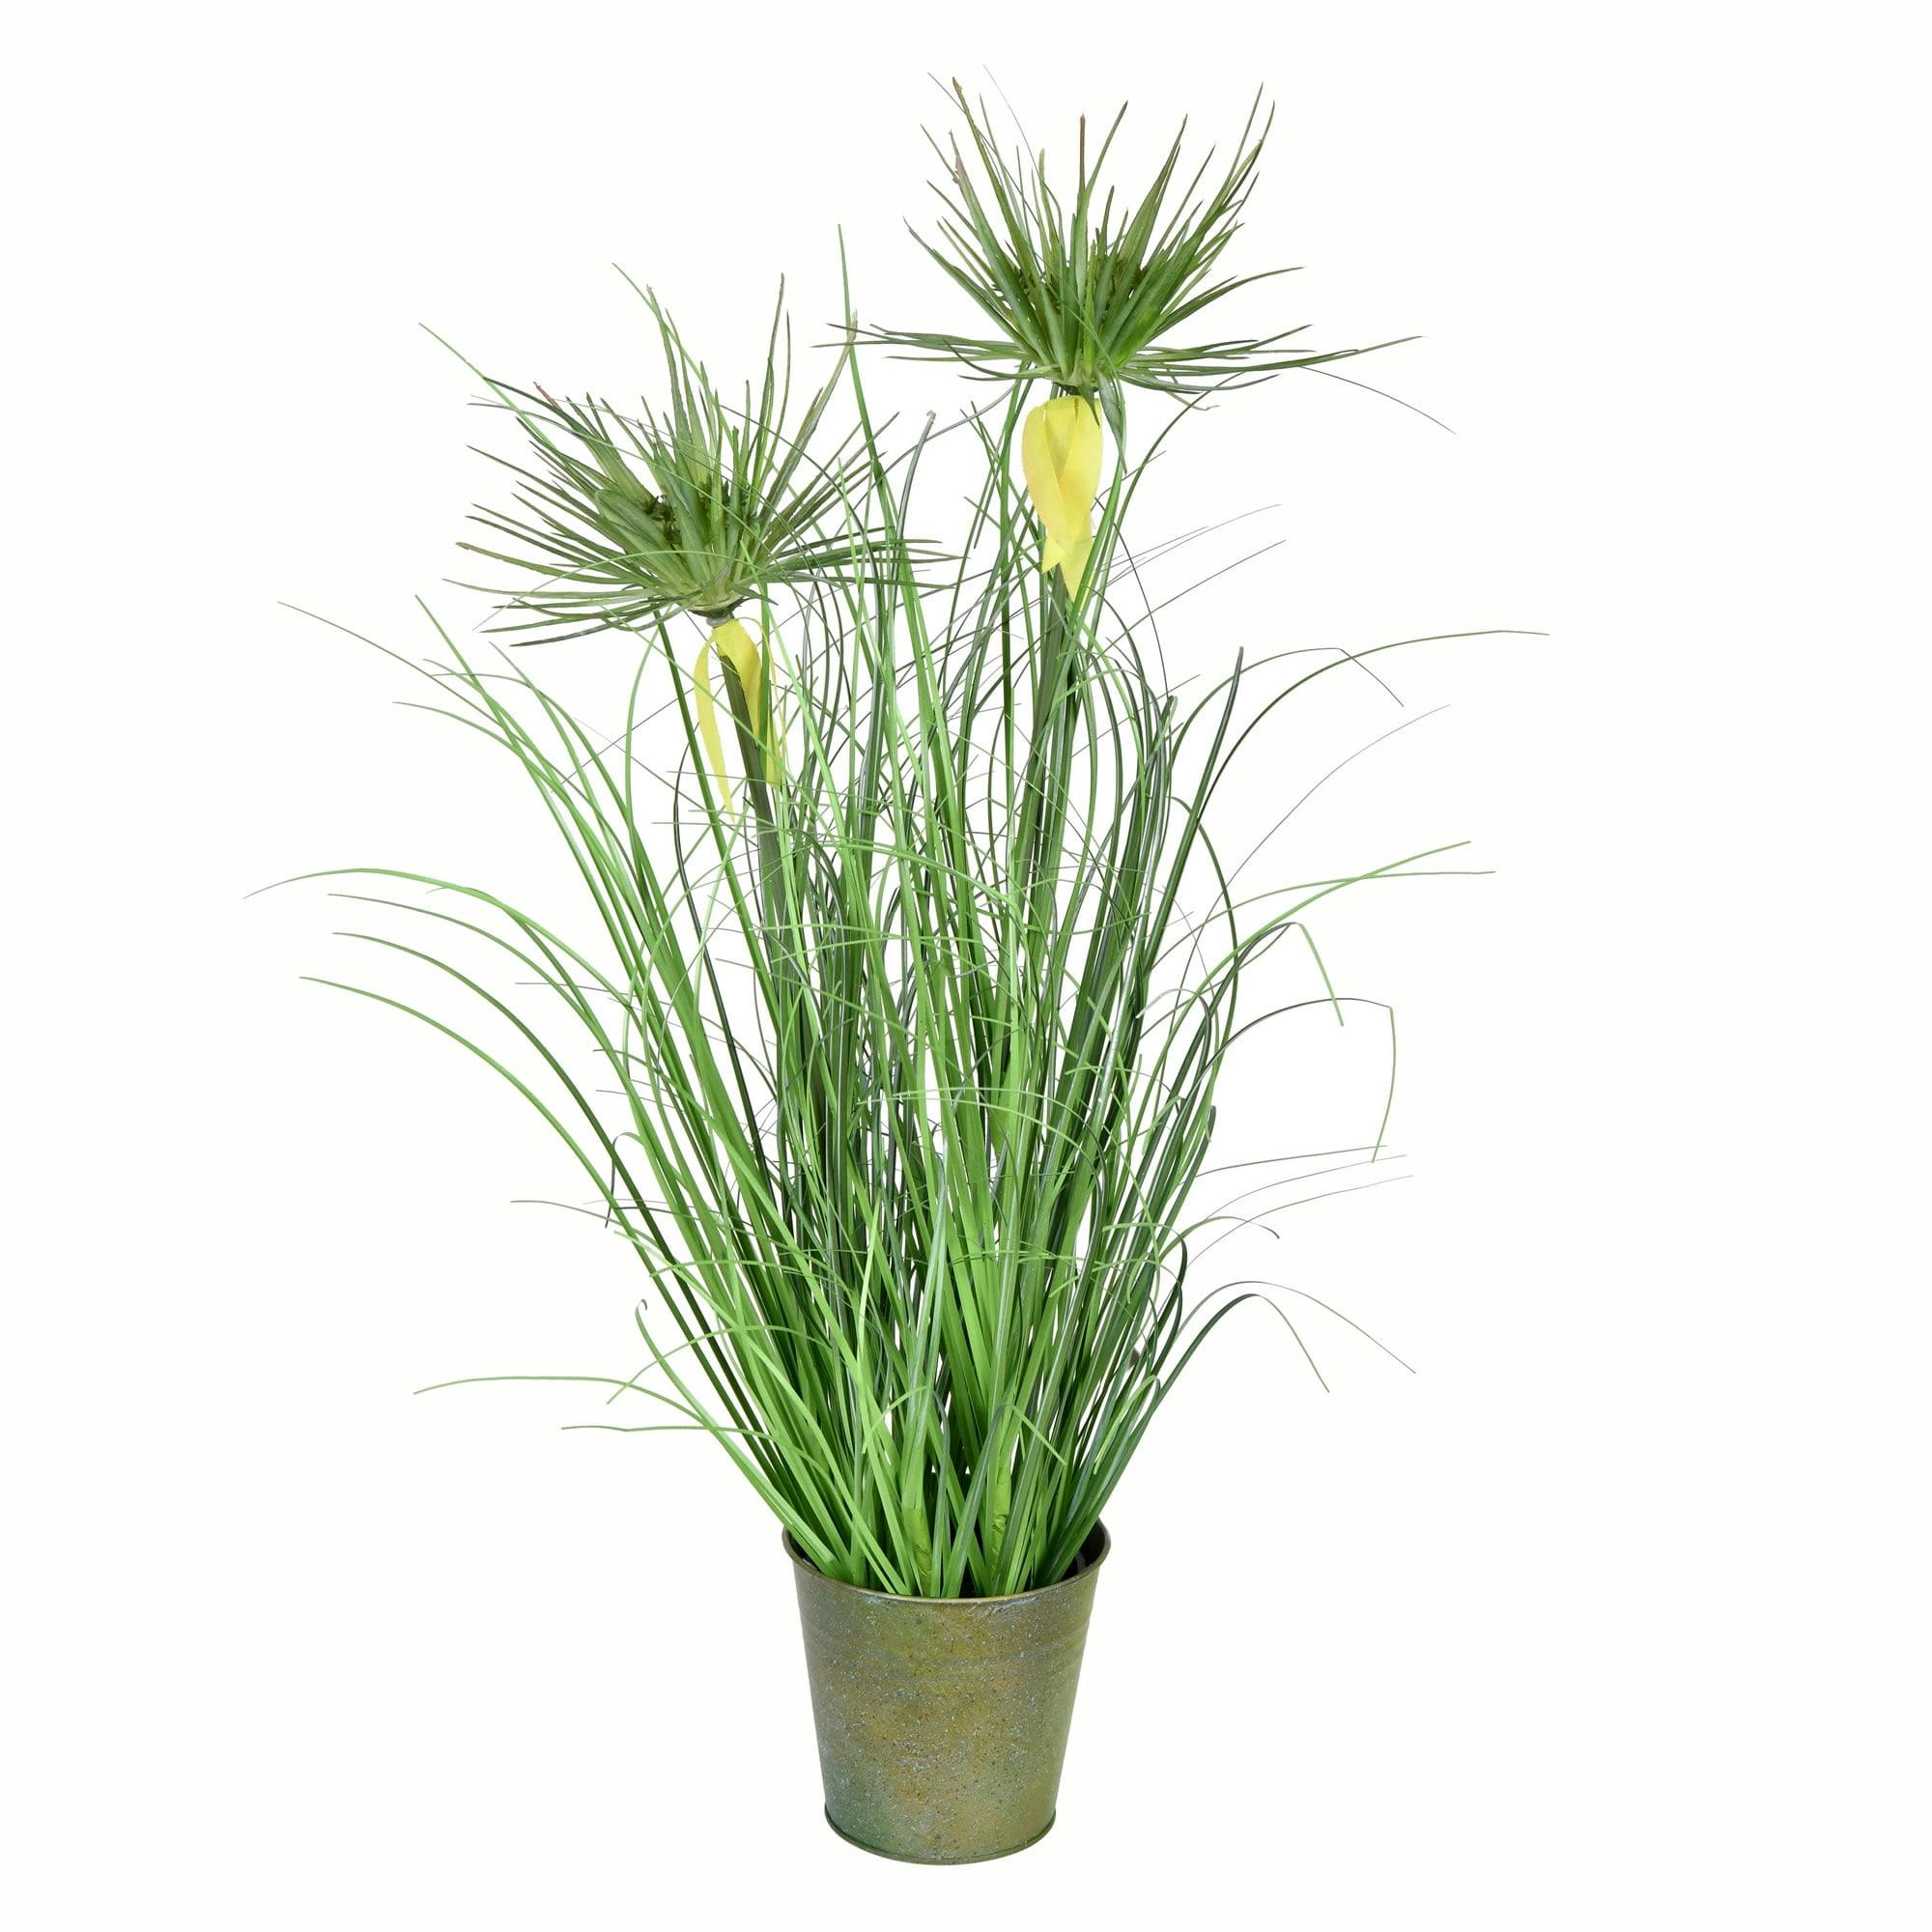 Twinkling 24" Outdoor Potted Grass Arrangement with Cyperus Heads